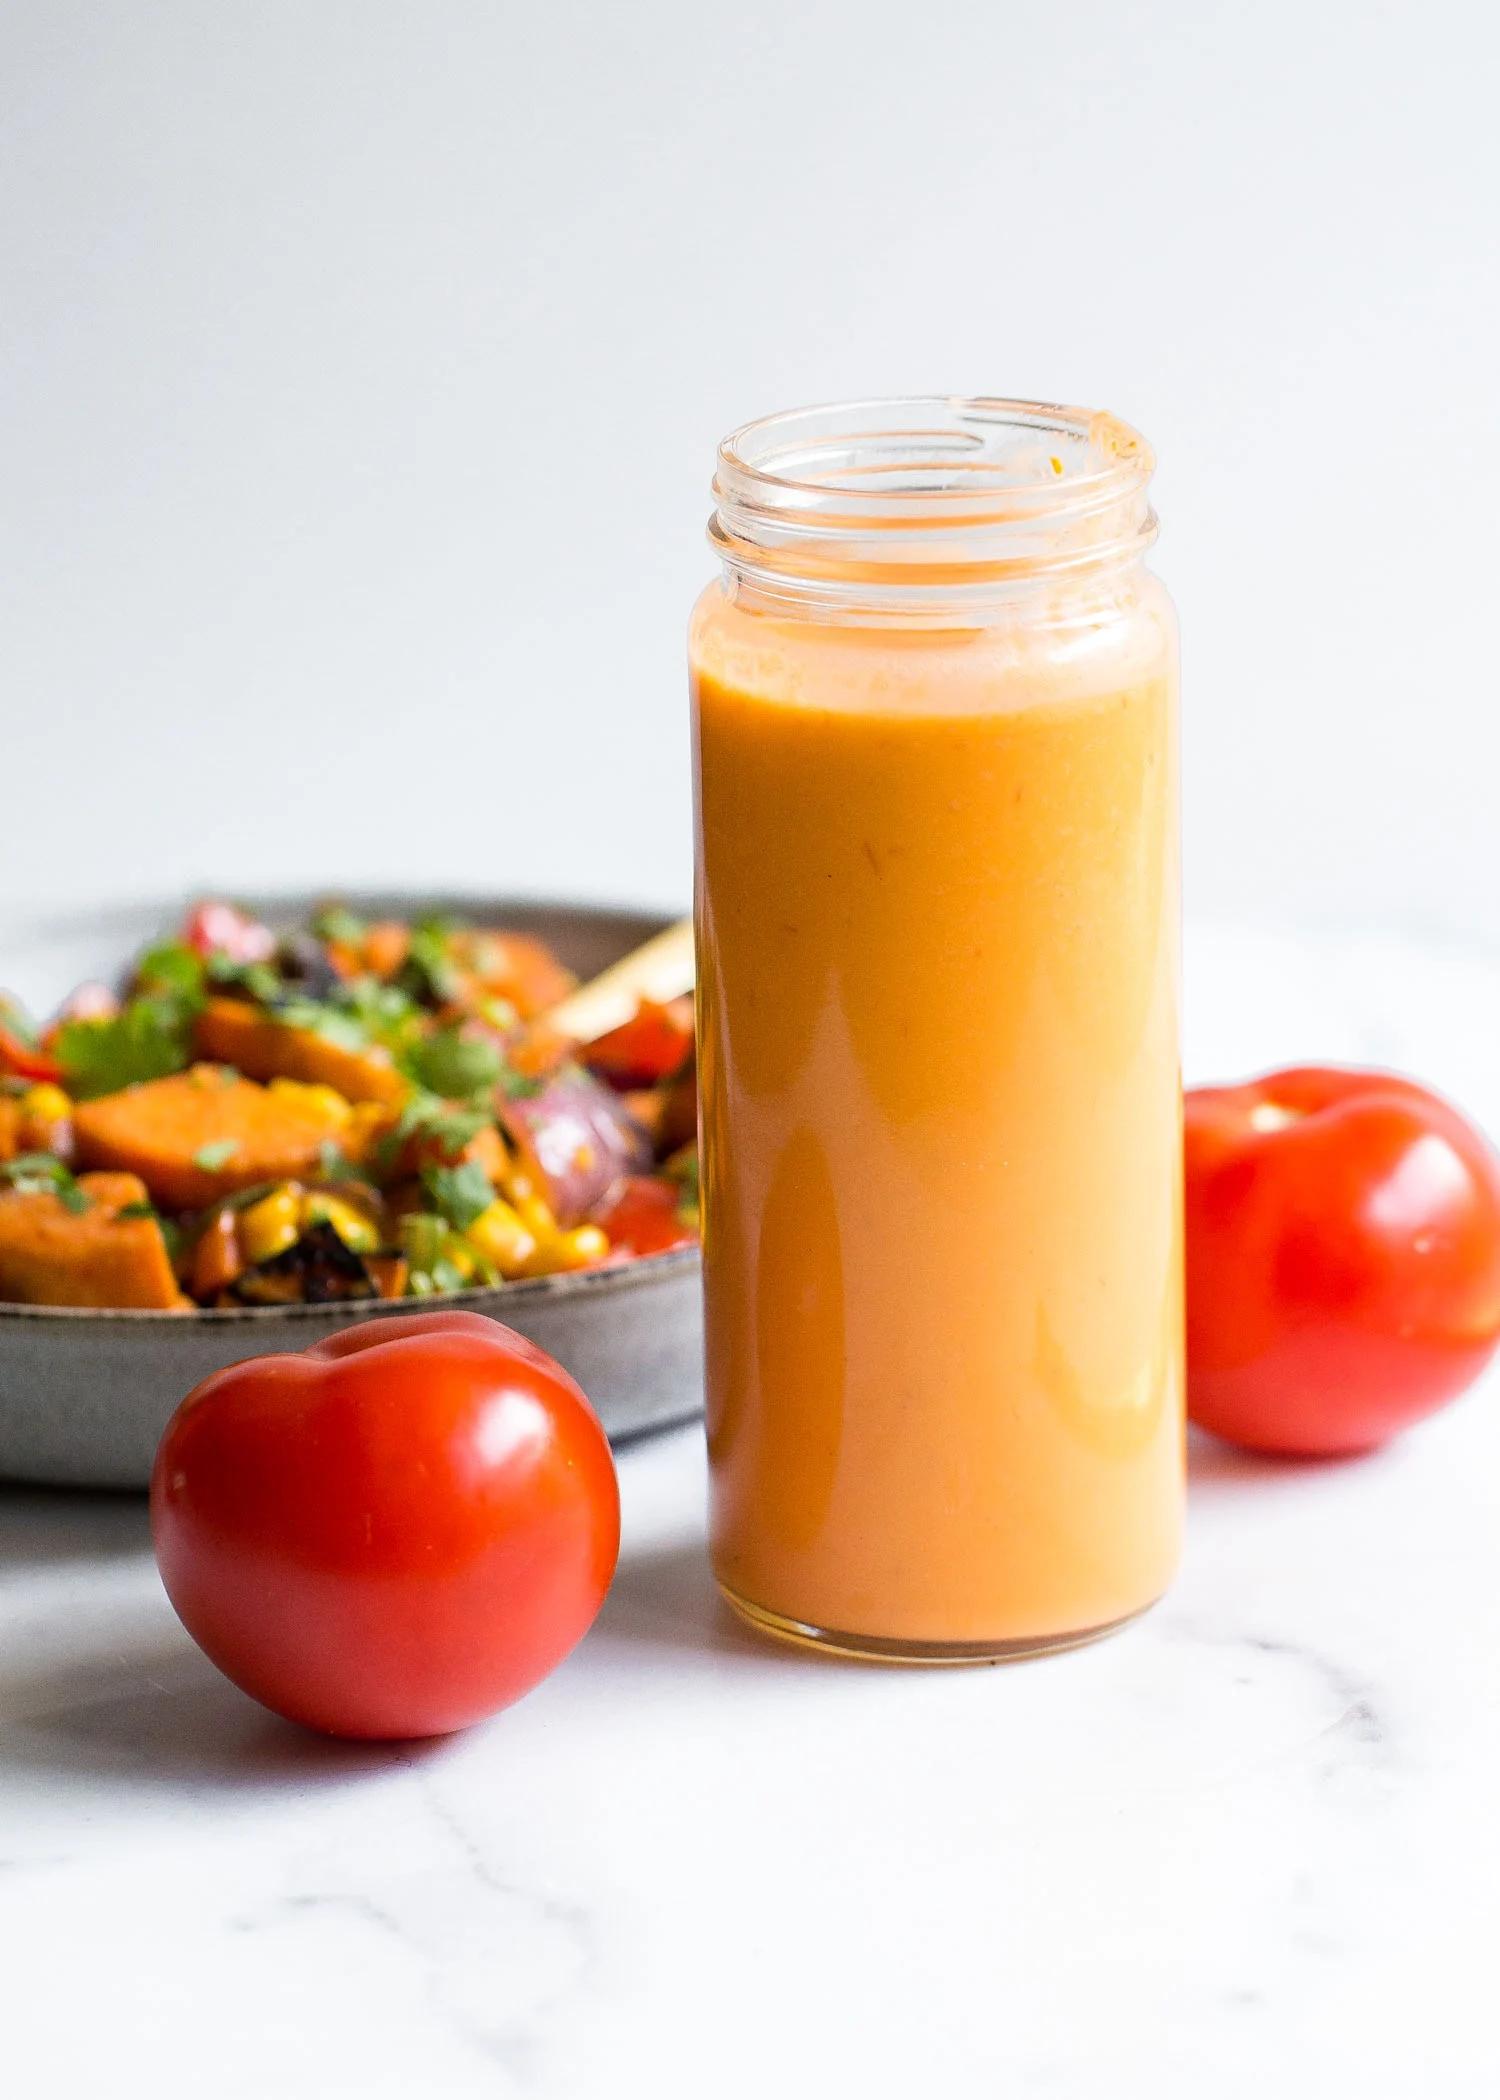 smoked tomato salad dressing - Is vinegar a healthy salad dressing